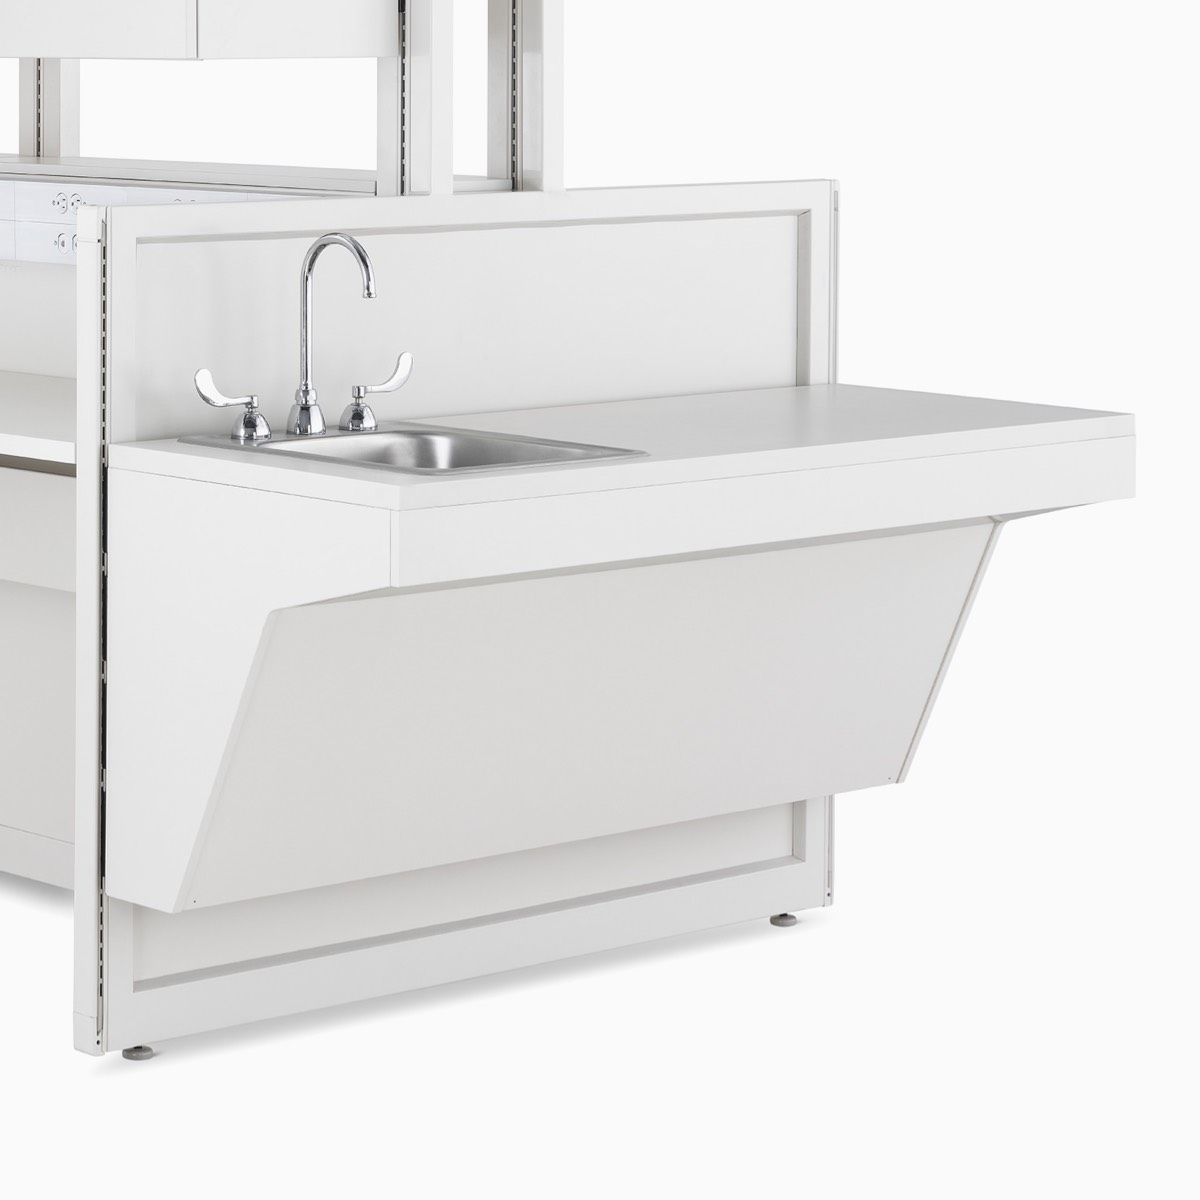 Detail of soft white Co/Struc System ADA sink hanging on a frame module.